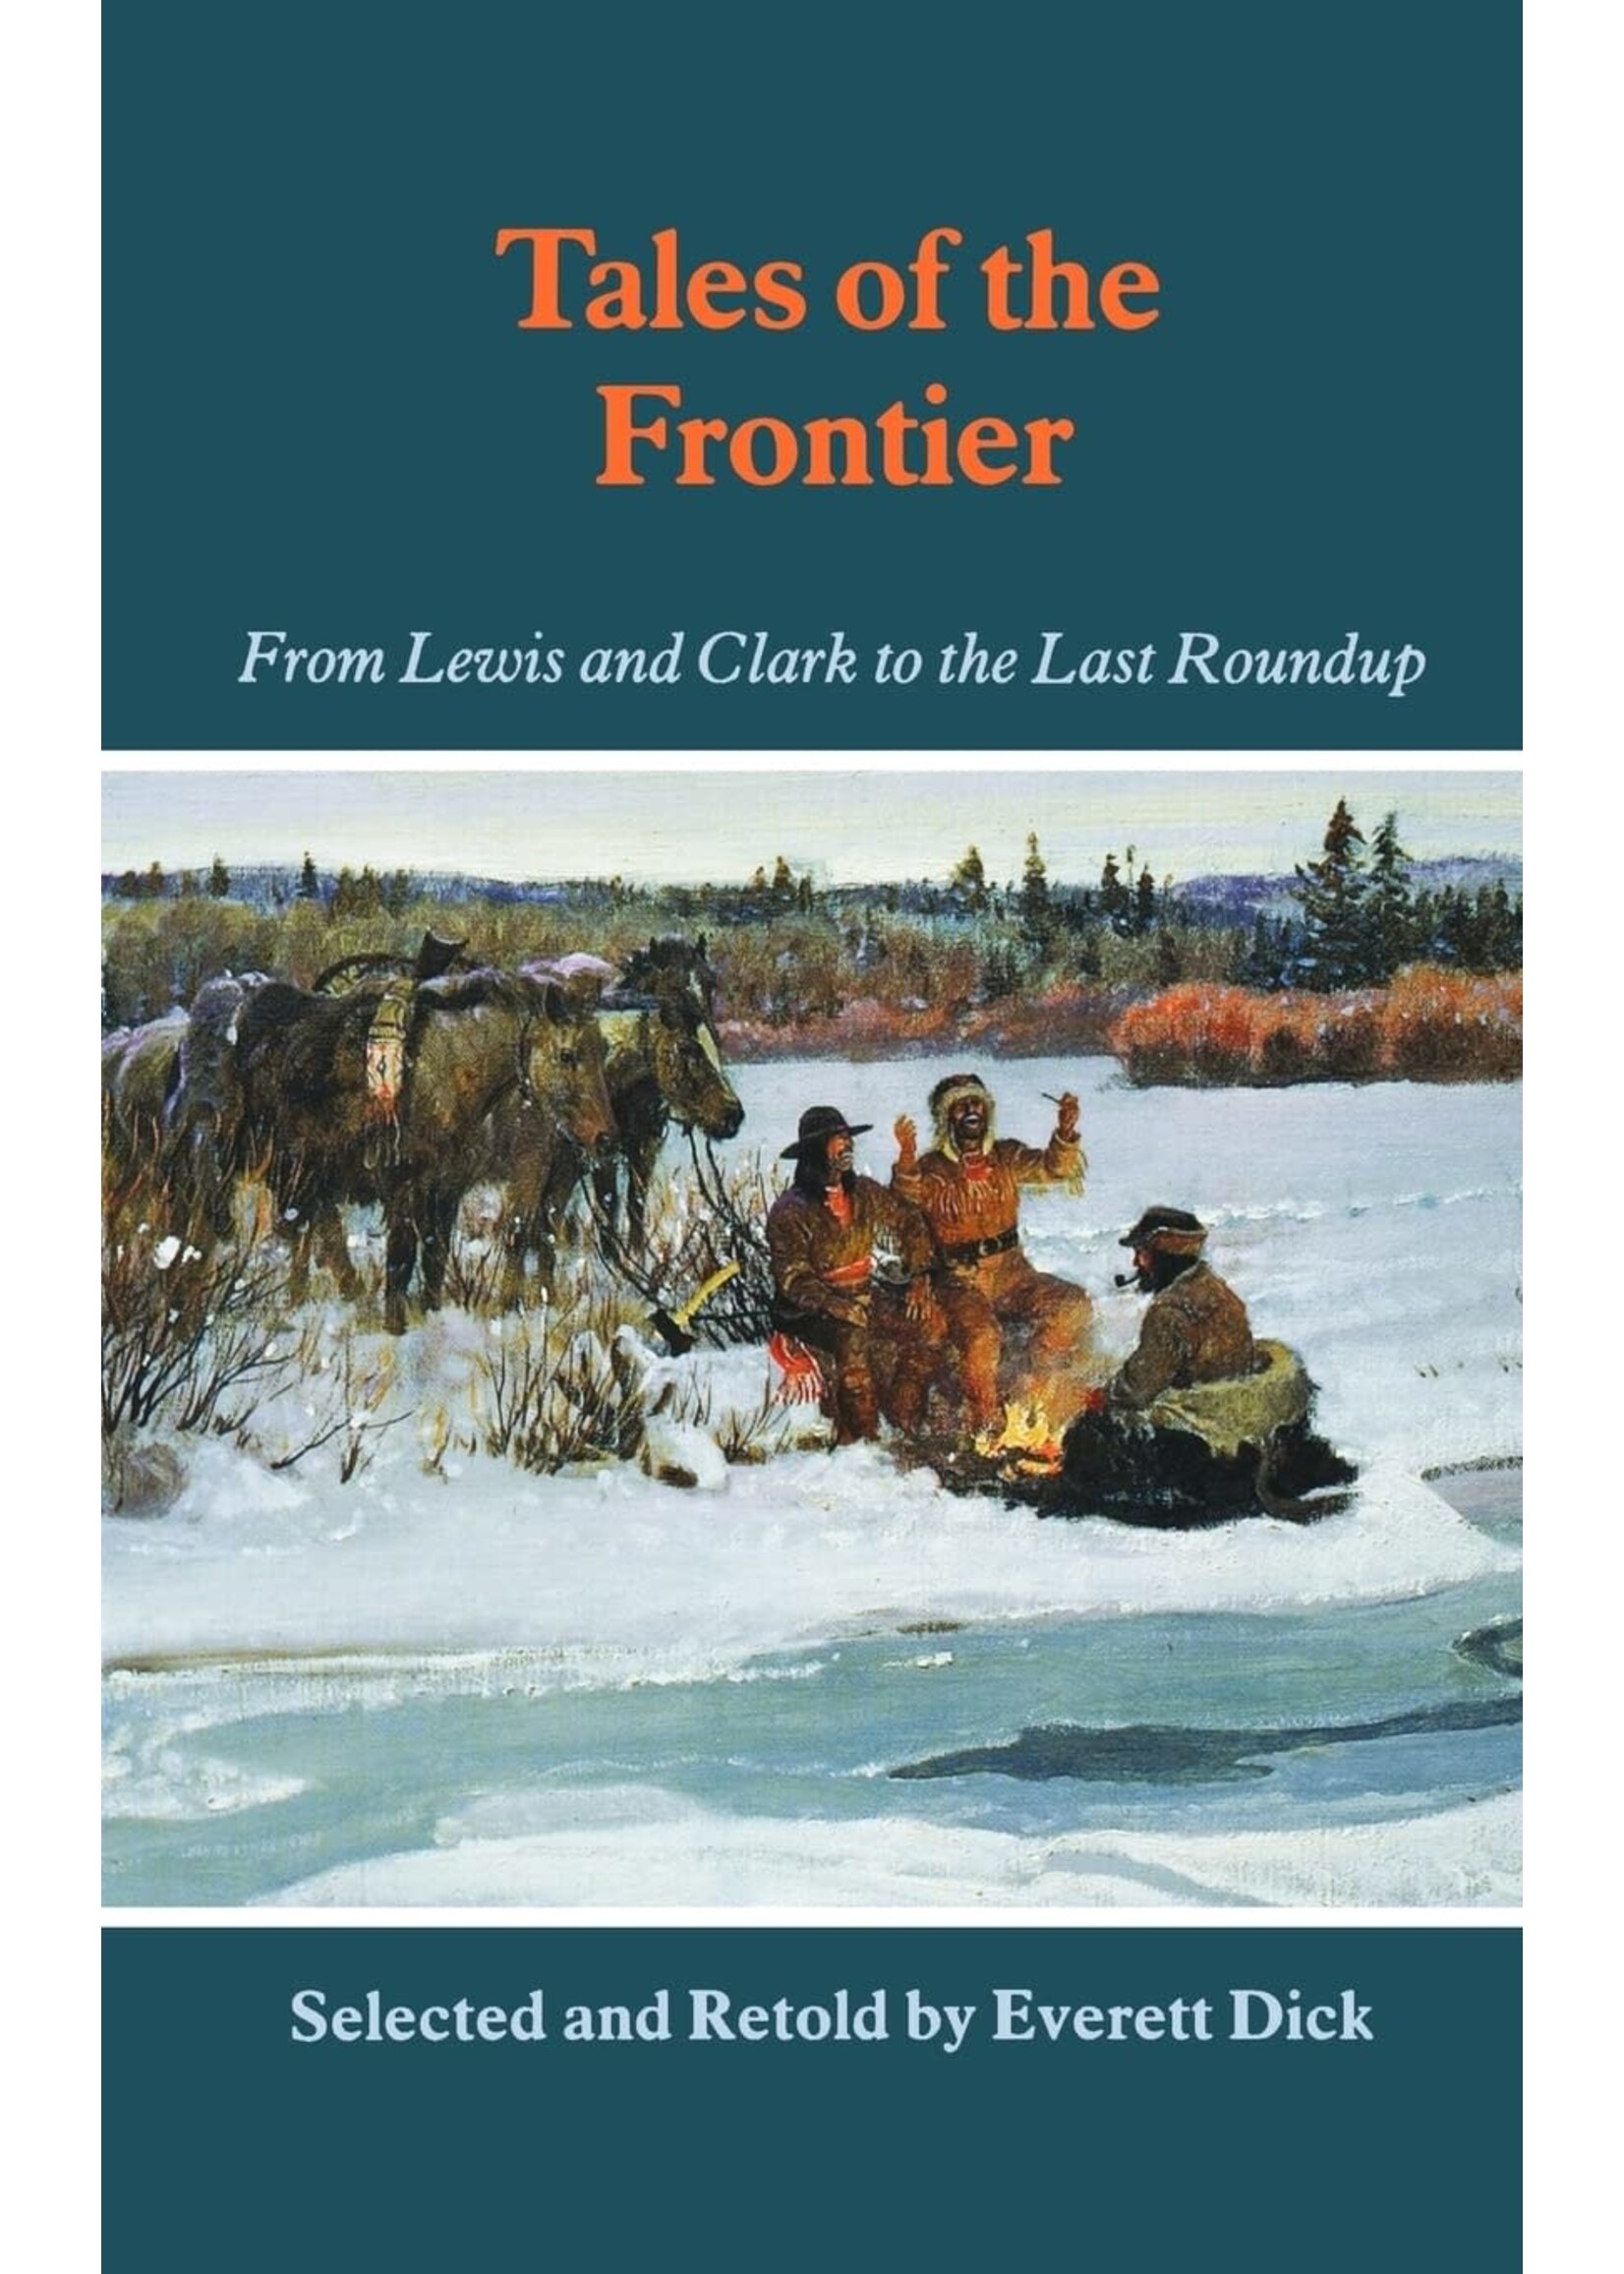 Tales of the Frontier: From Lewis and Clark to the Last Roundup